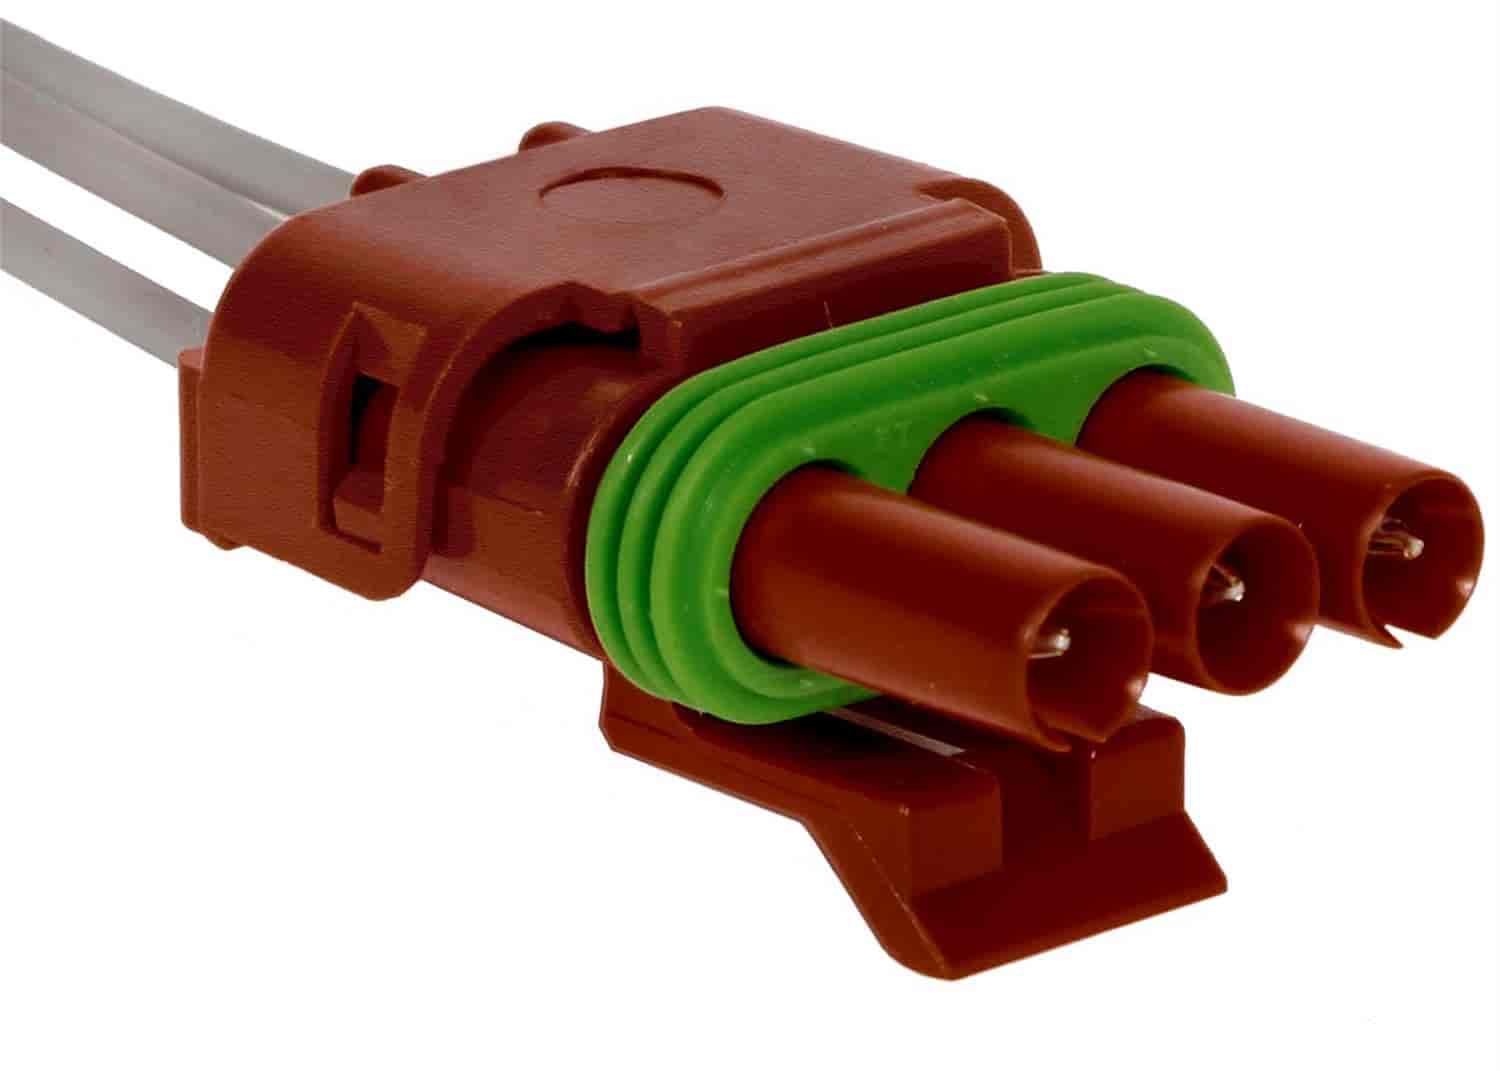 CONNECTOR-W/LEADS 3-WAY